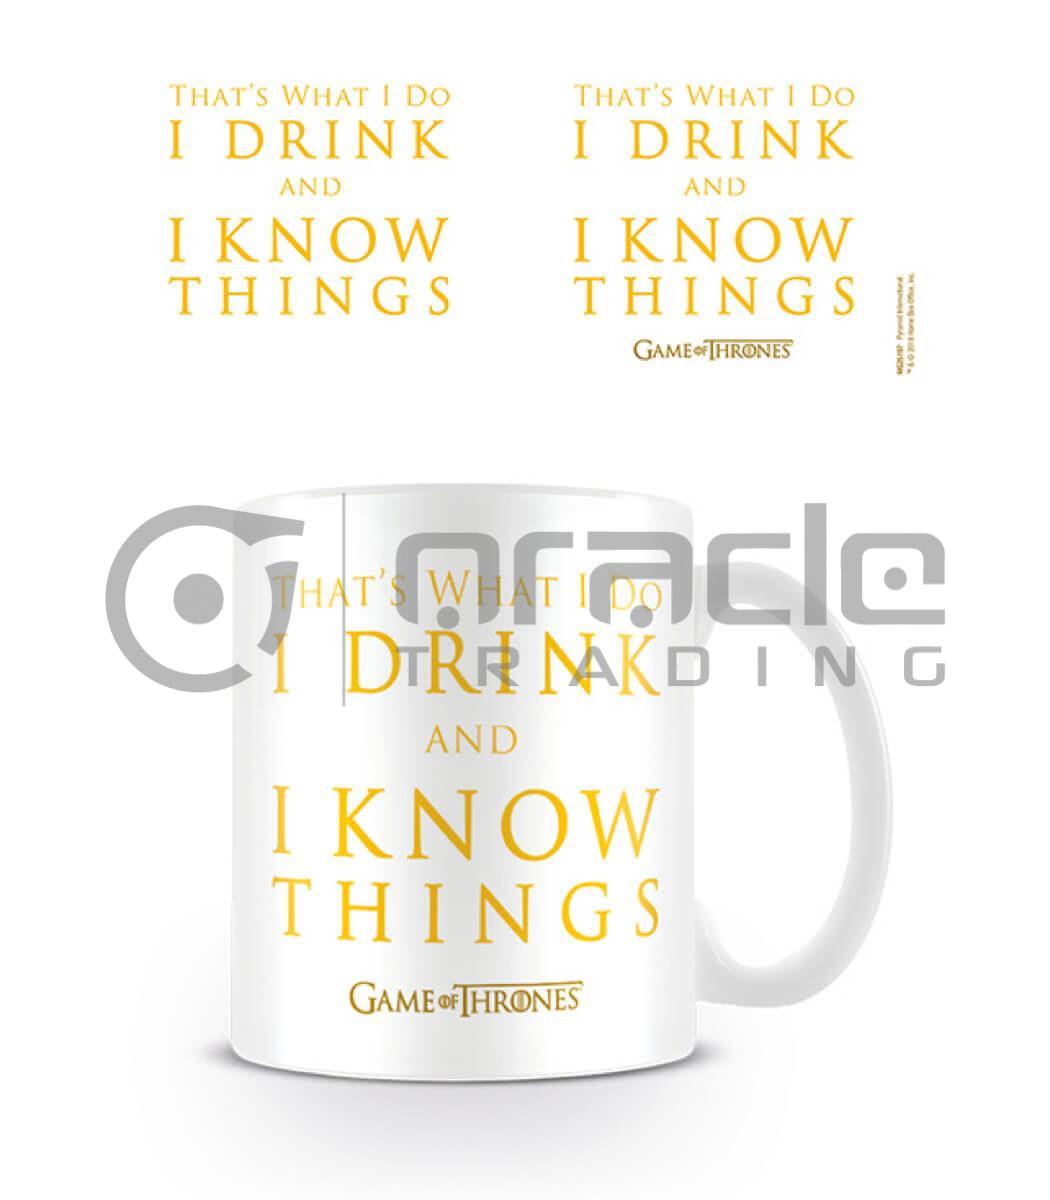 I Drink & I Know Things Mug - Game of Thrones